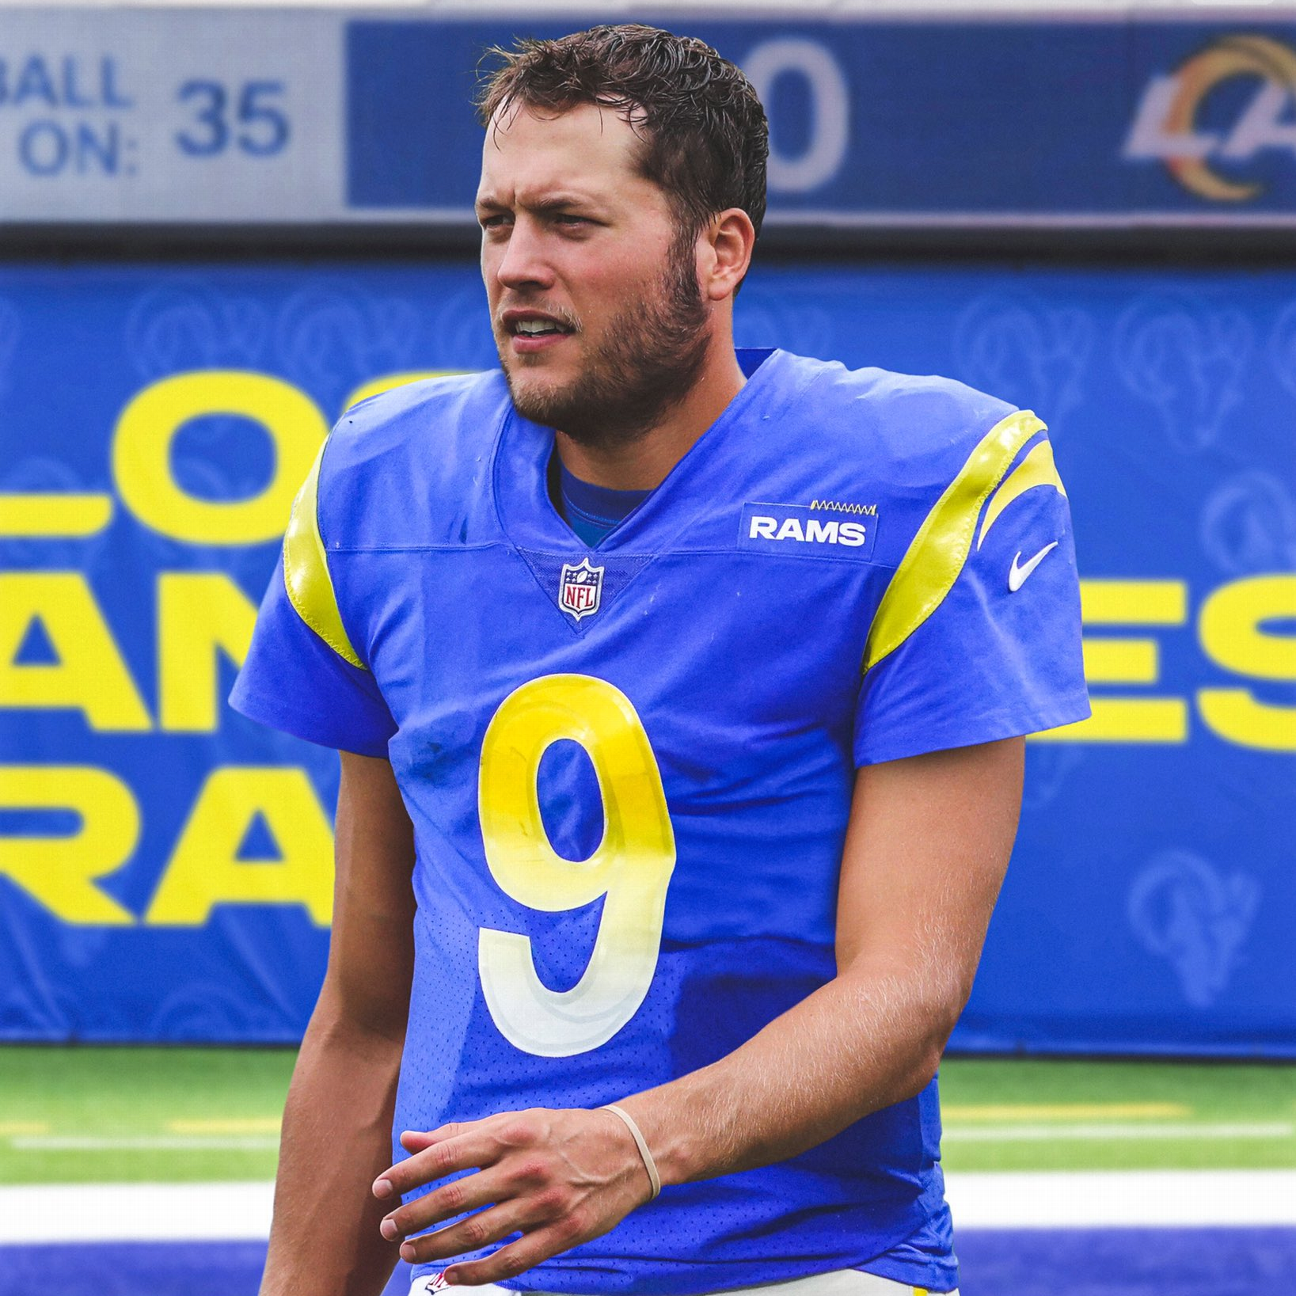 Sources: Avid gamers text Stafford on Rams crew-up